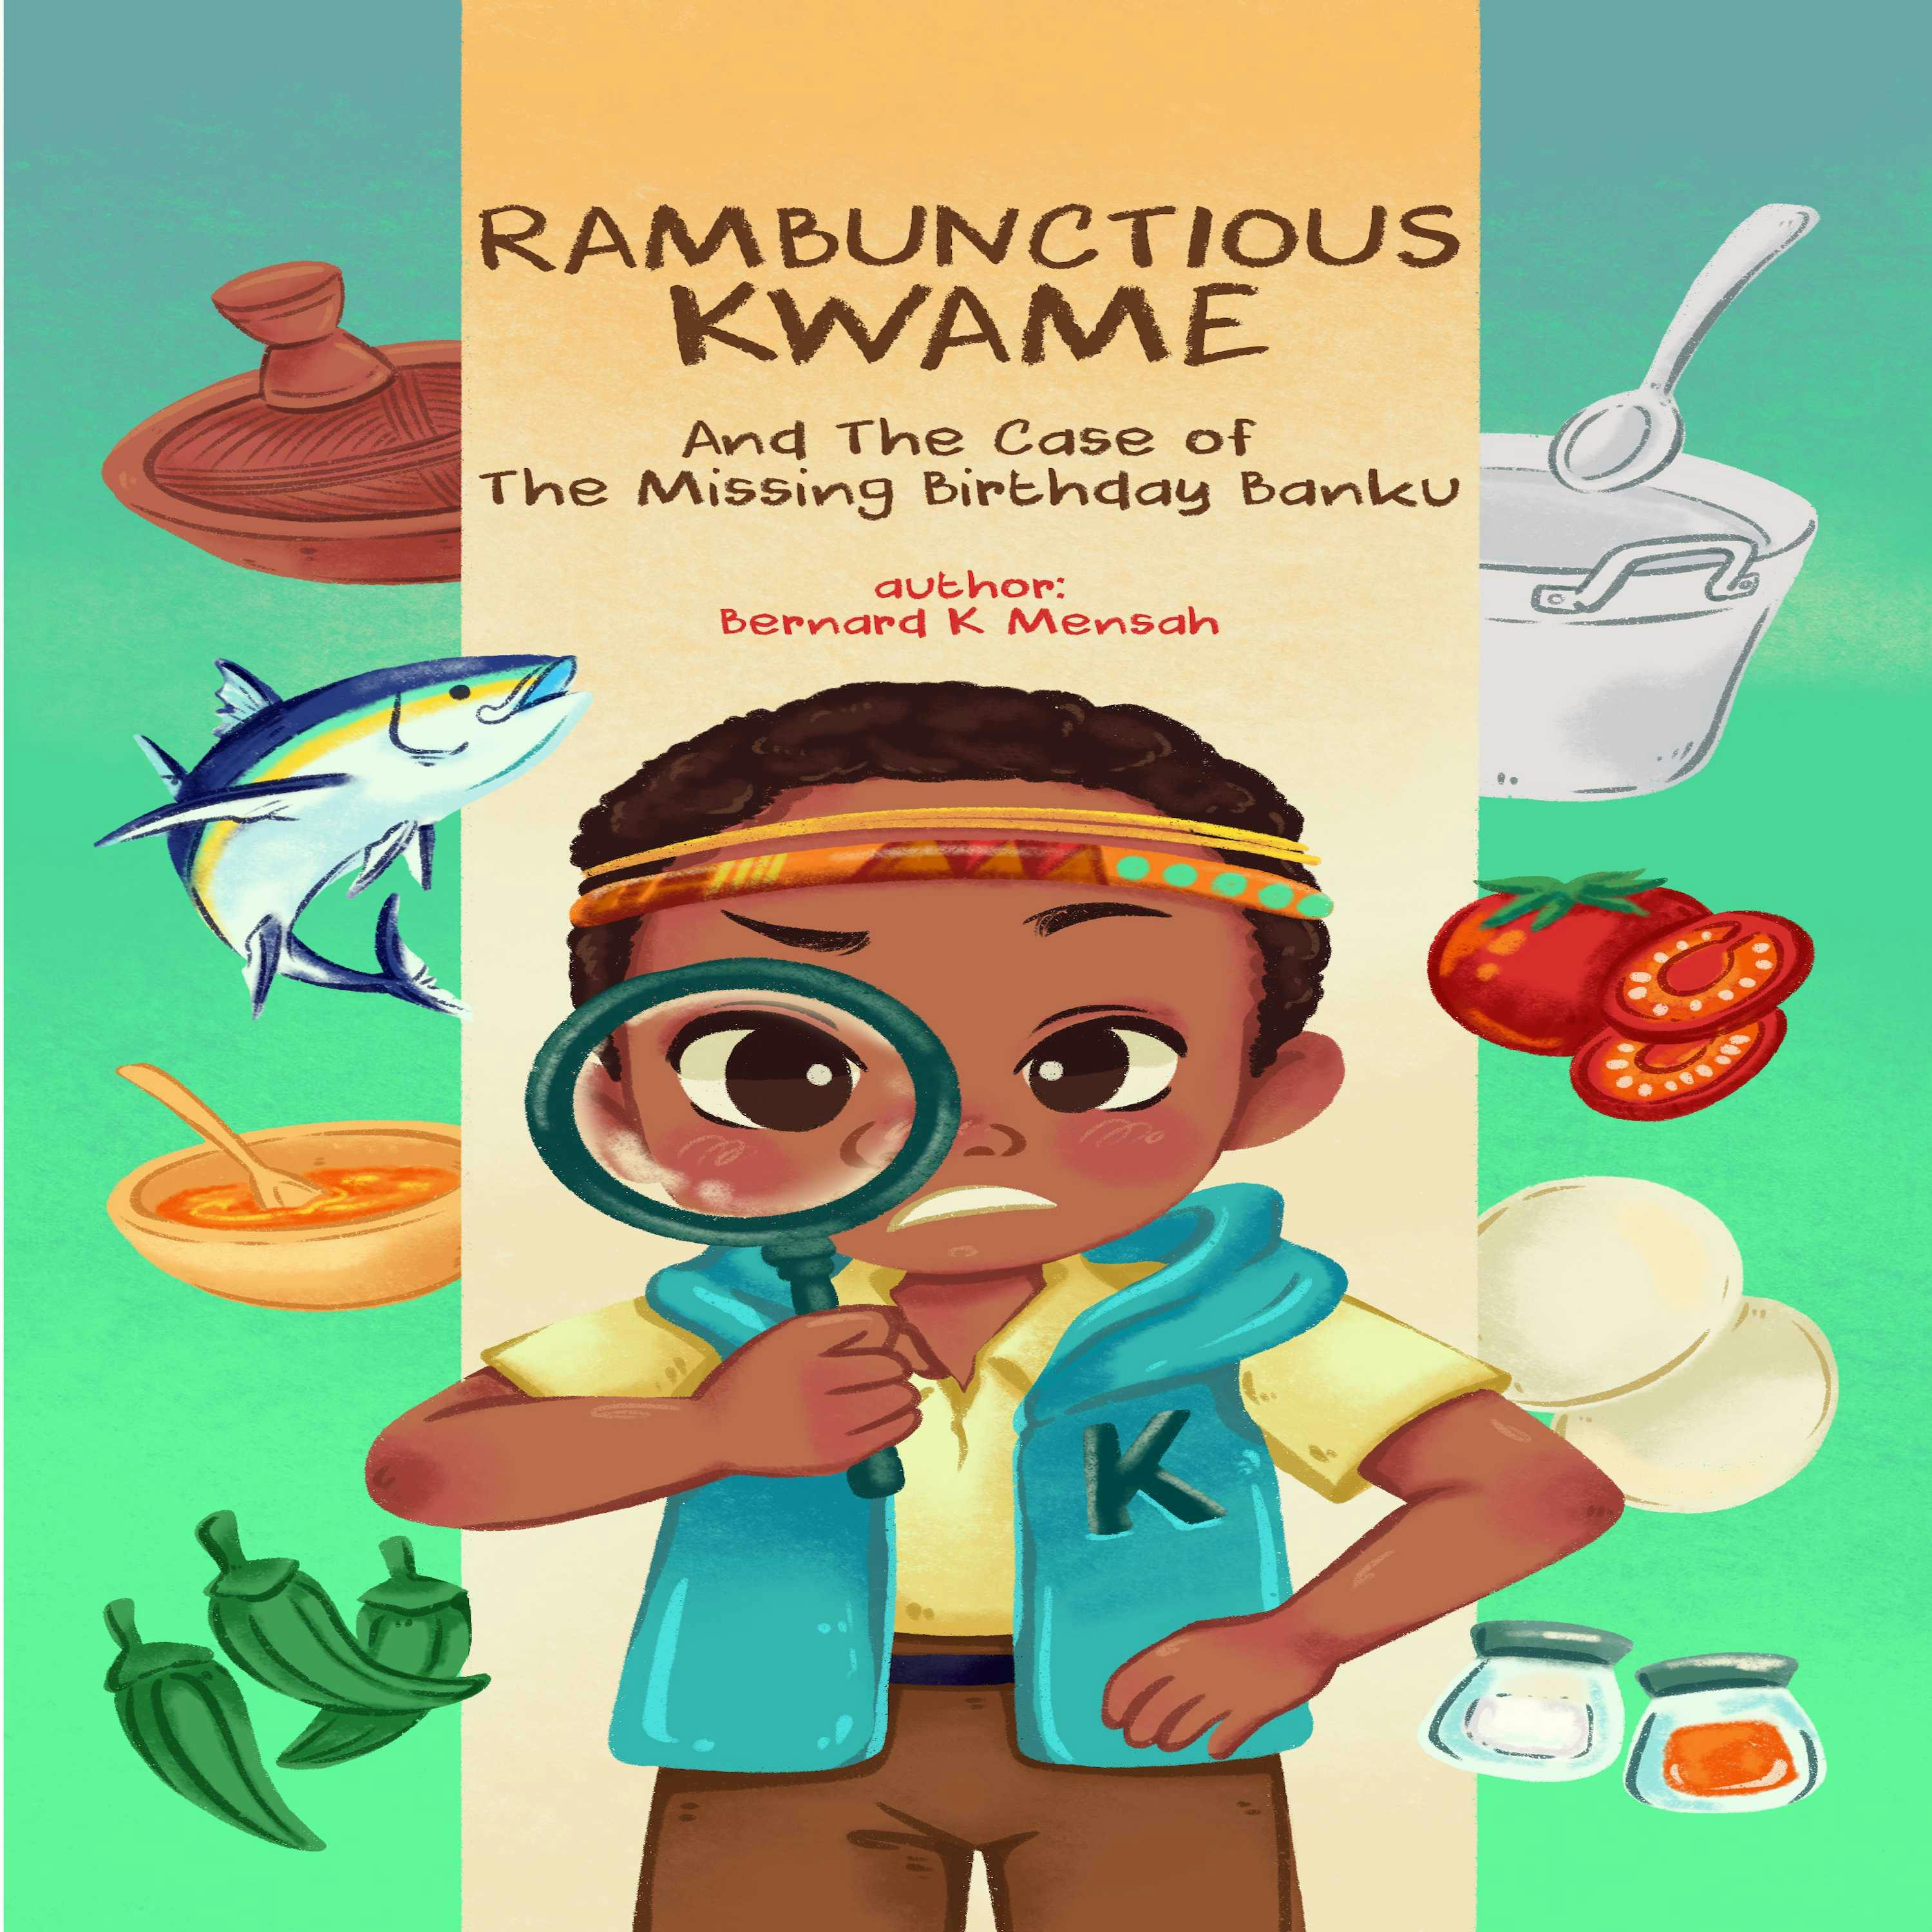 Rambunctious Kwame and the case of the missing birthday banku: The case of the missing birthday banku - Bernard Mensah